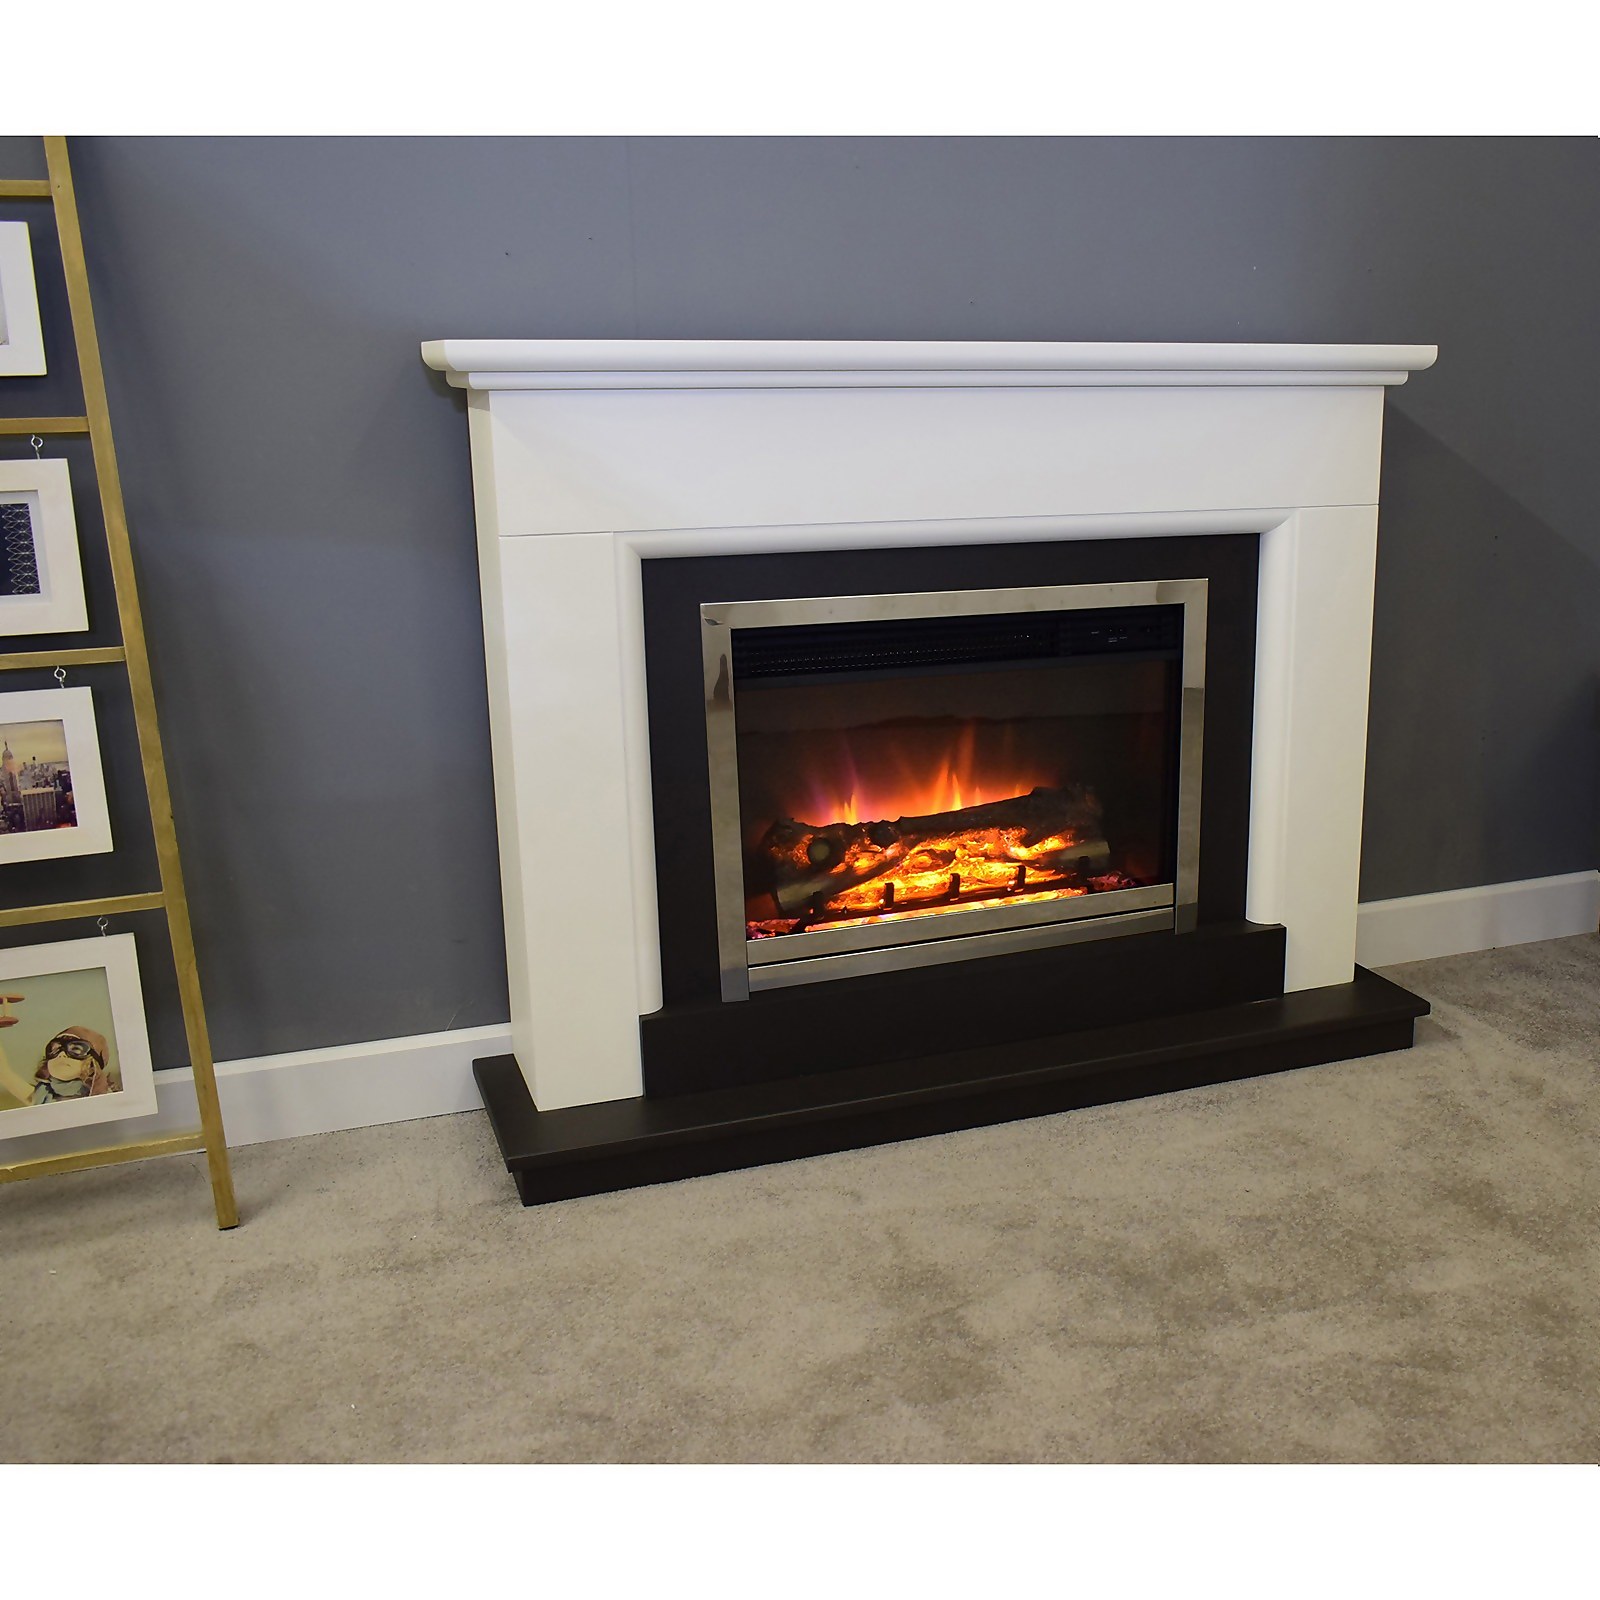 Suncrest Talent Electric Fire Suite with Smart Remote & Flat to Wall Fitting - White, Graphite & Chrome